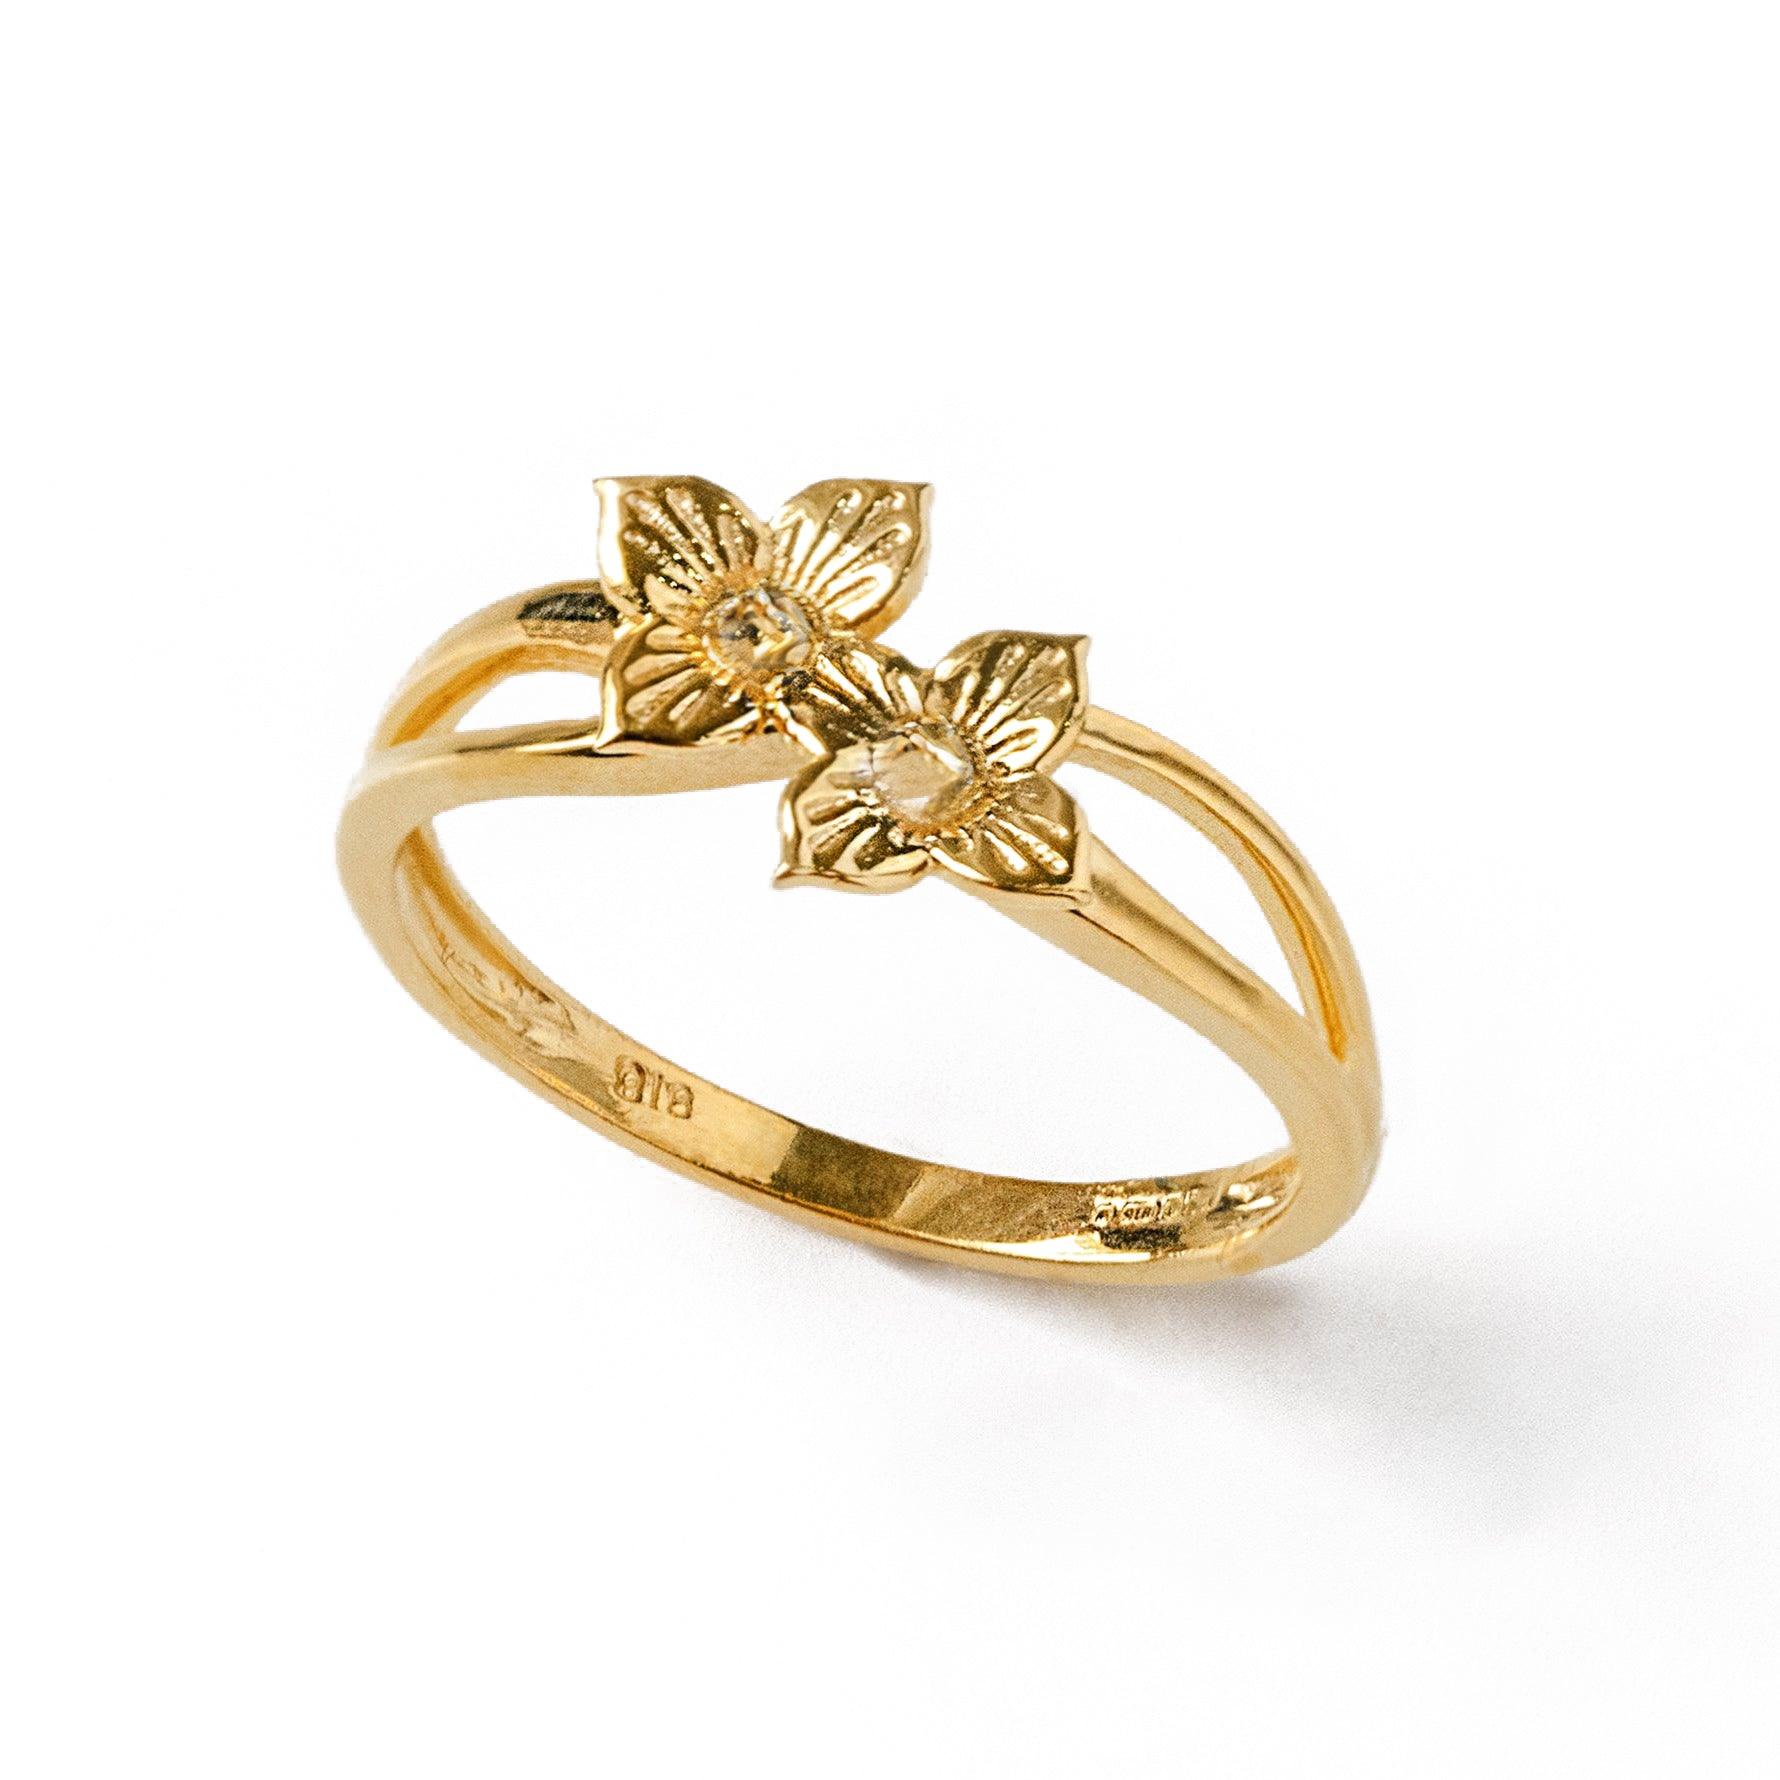 22ct-gold-dress-ring-with-flowers